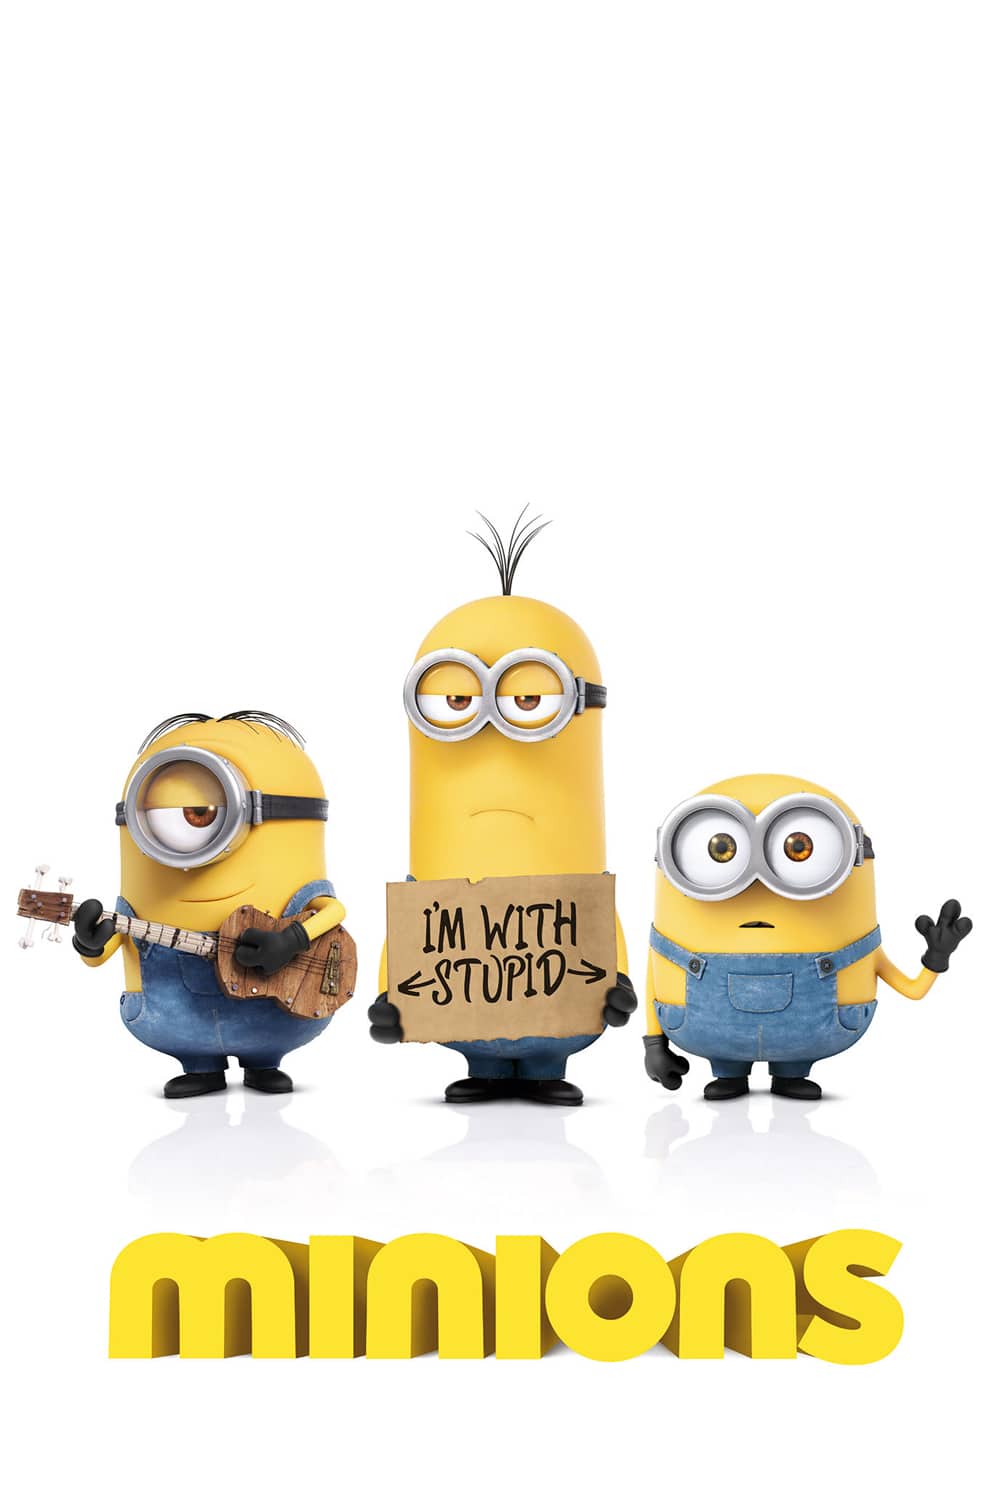 Minions download the new for mac